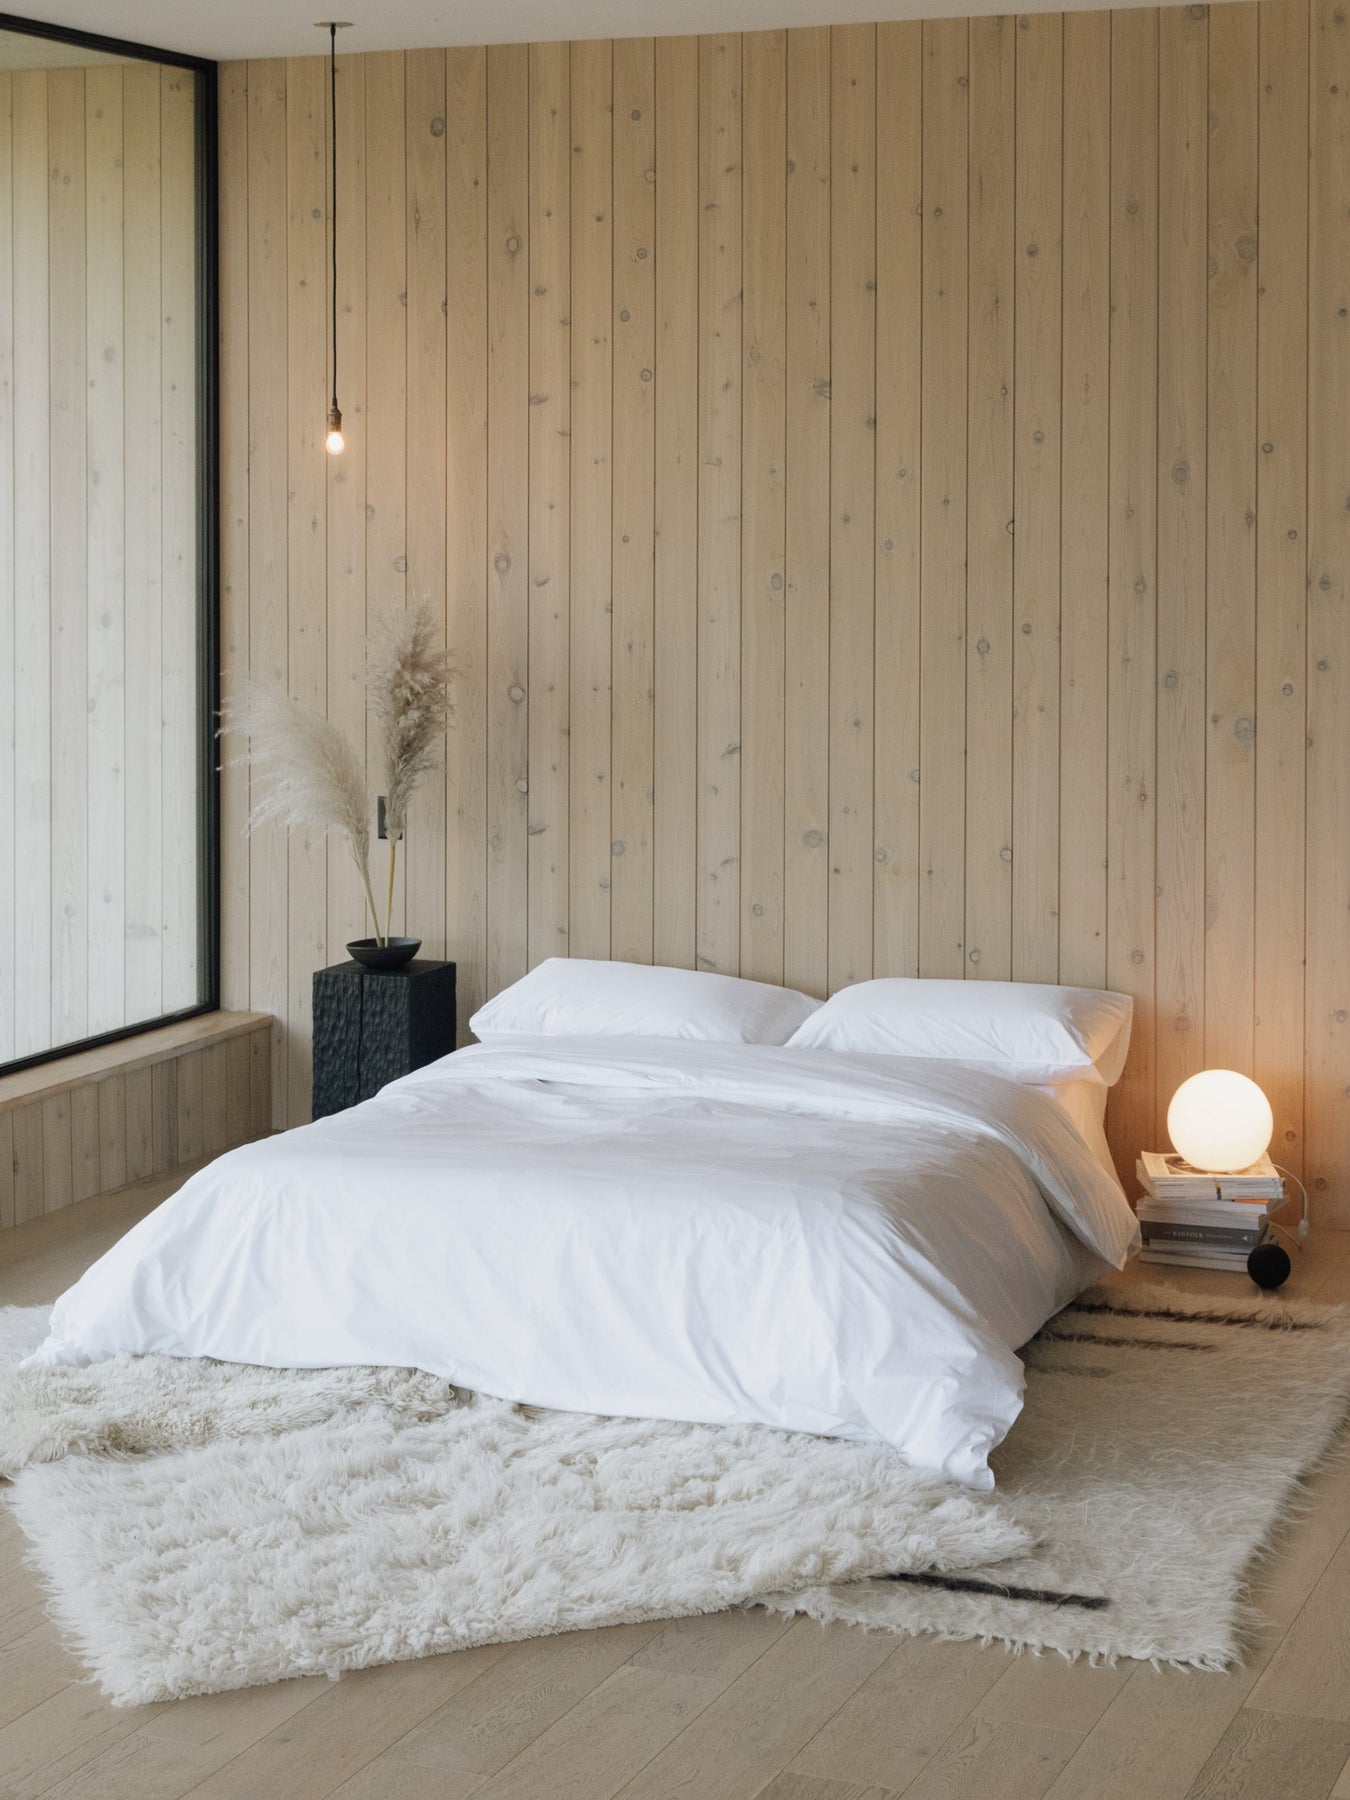 Shop organic cotton bedding, duvet covers and pillow cases from sustainable home wear brand Takasa.